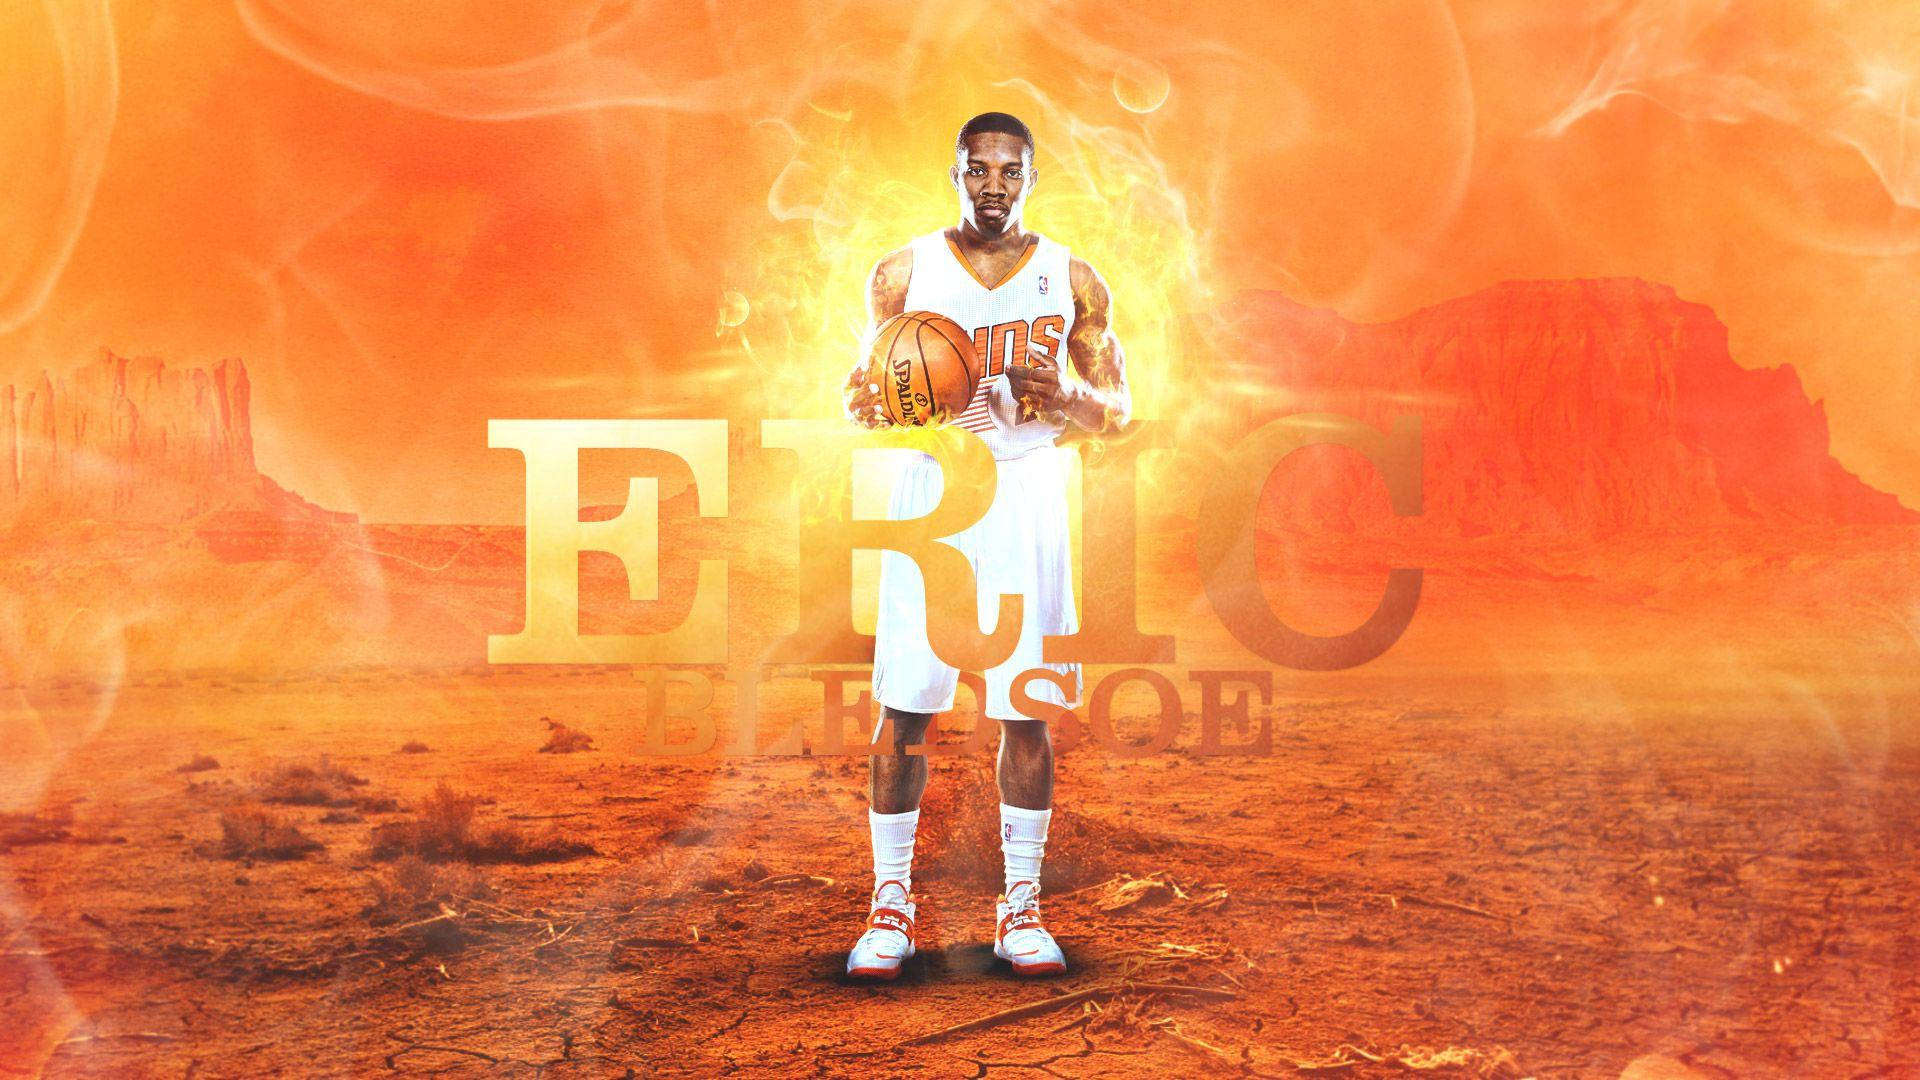 Eric Bledsoe On Fire